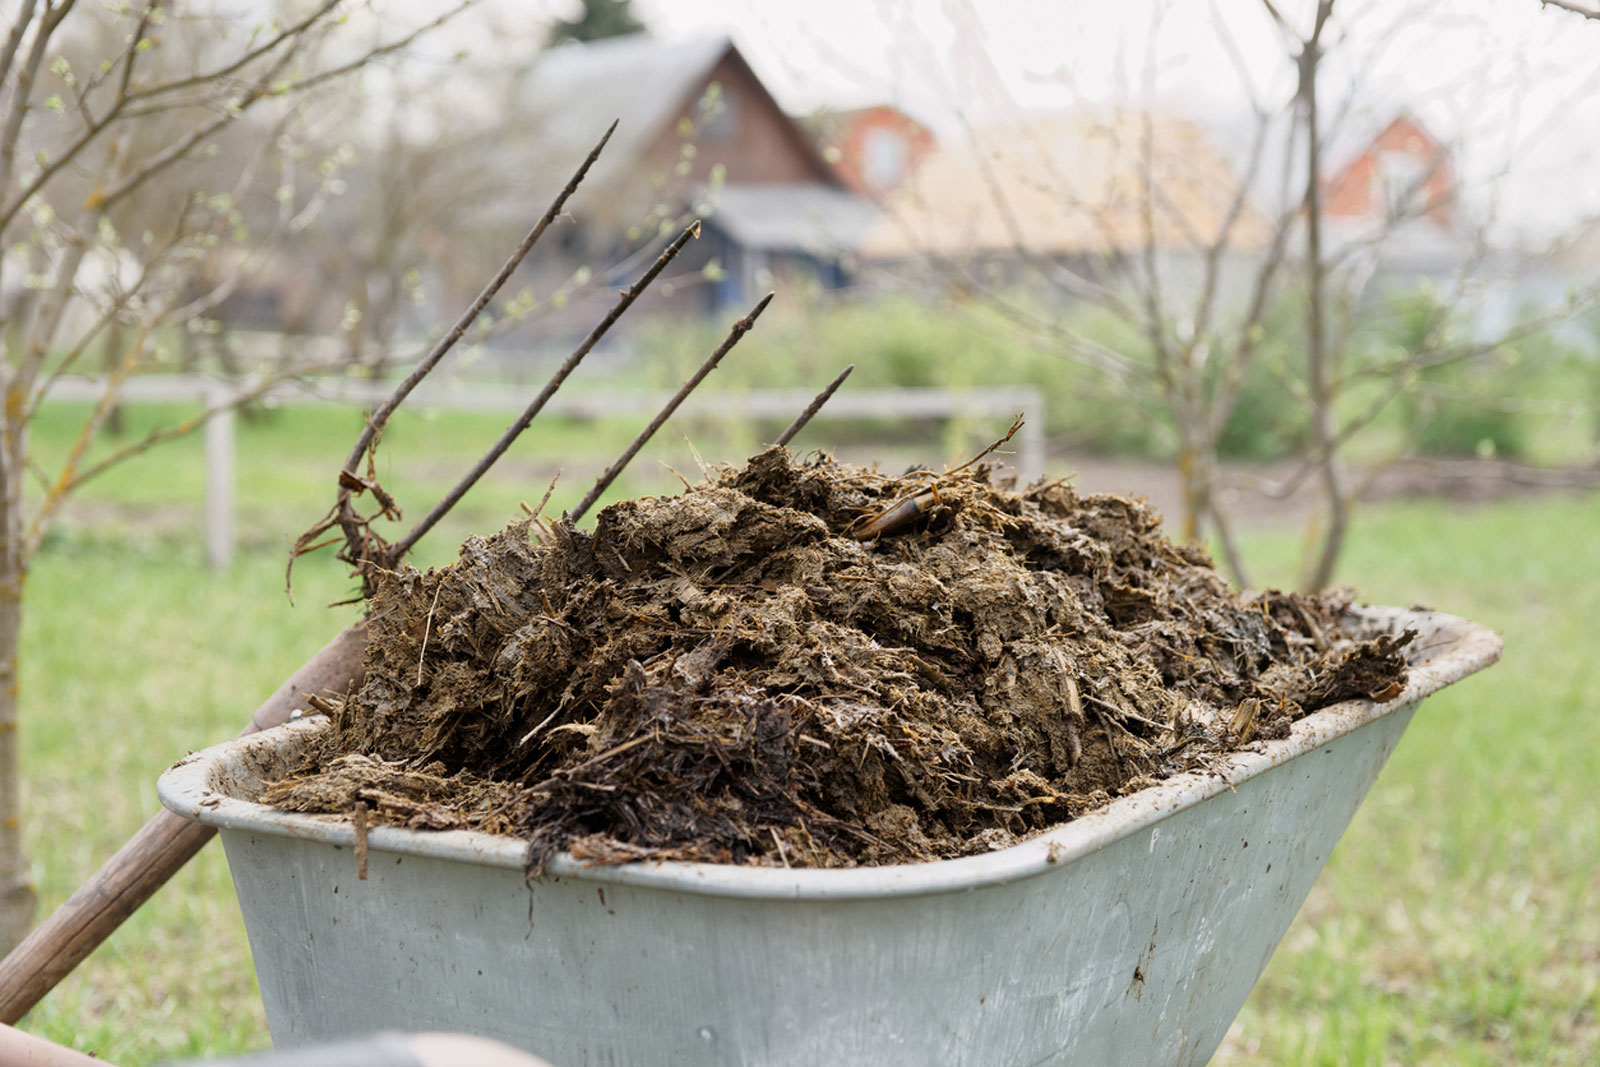 How To Find The Best Manure For Gardening?